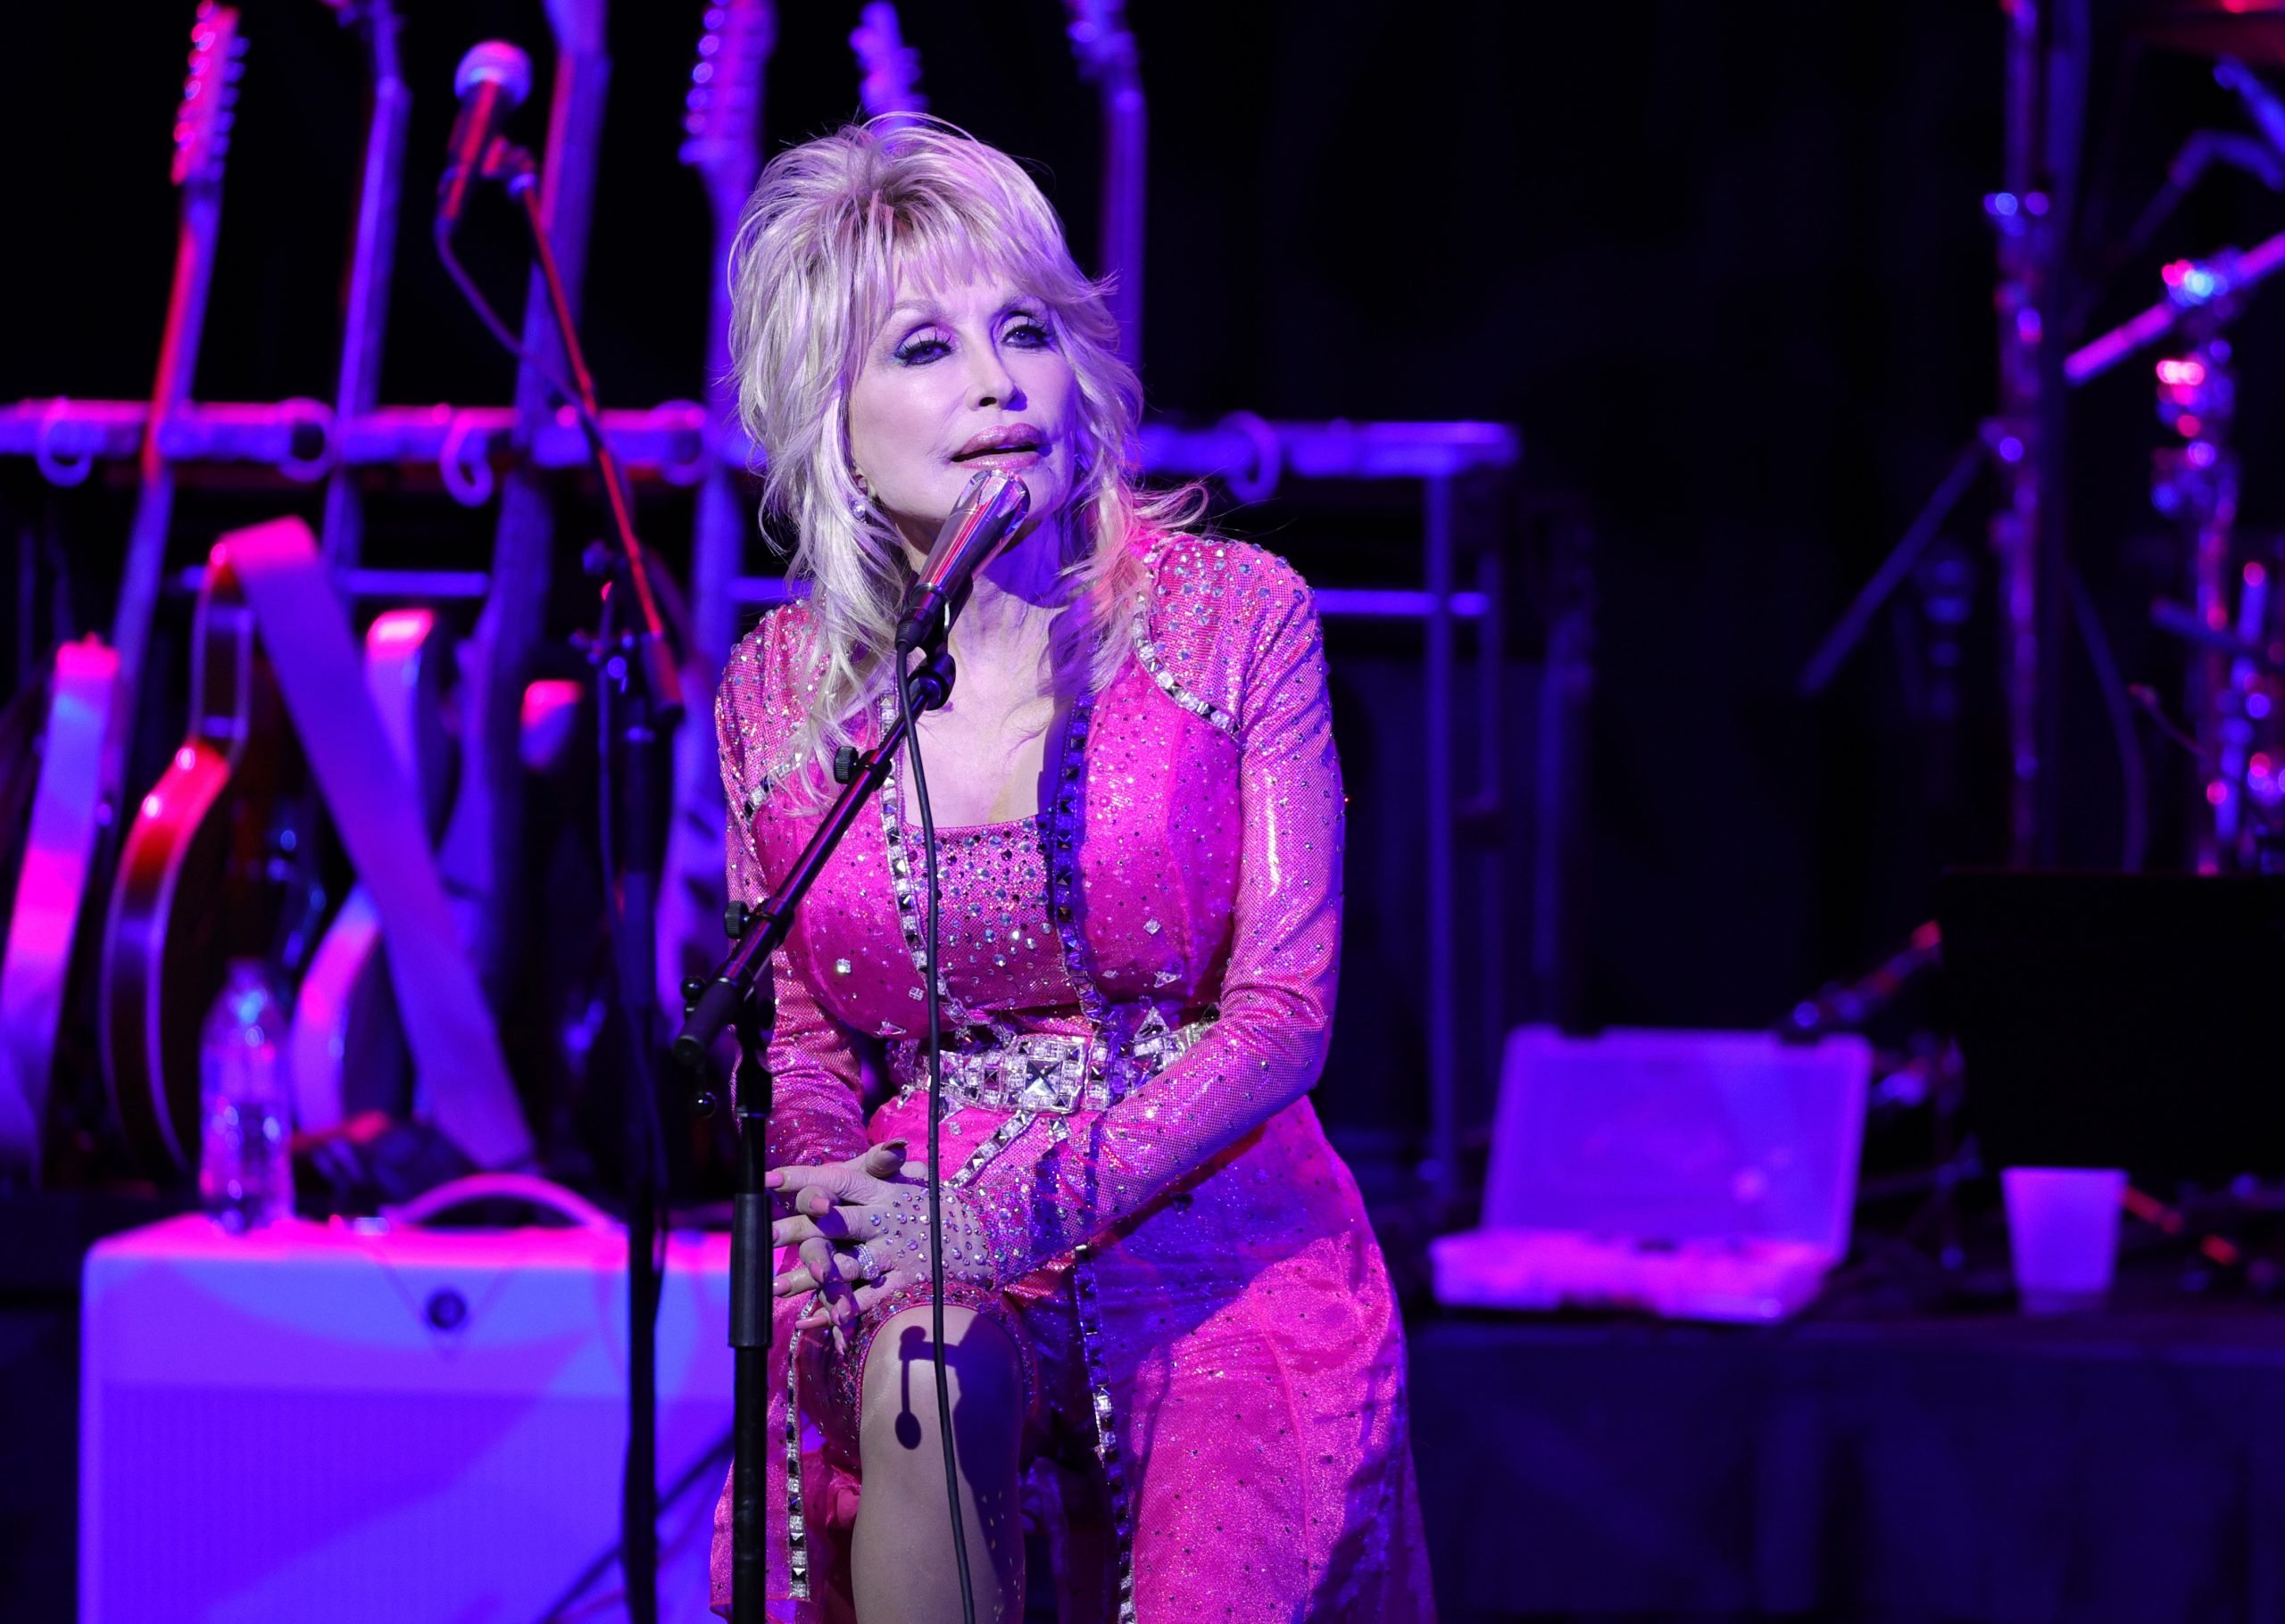 Dolly Parton sings into a microphone wearing a hot pink outfit